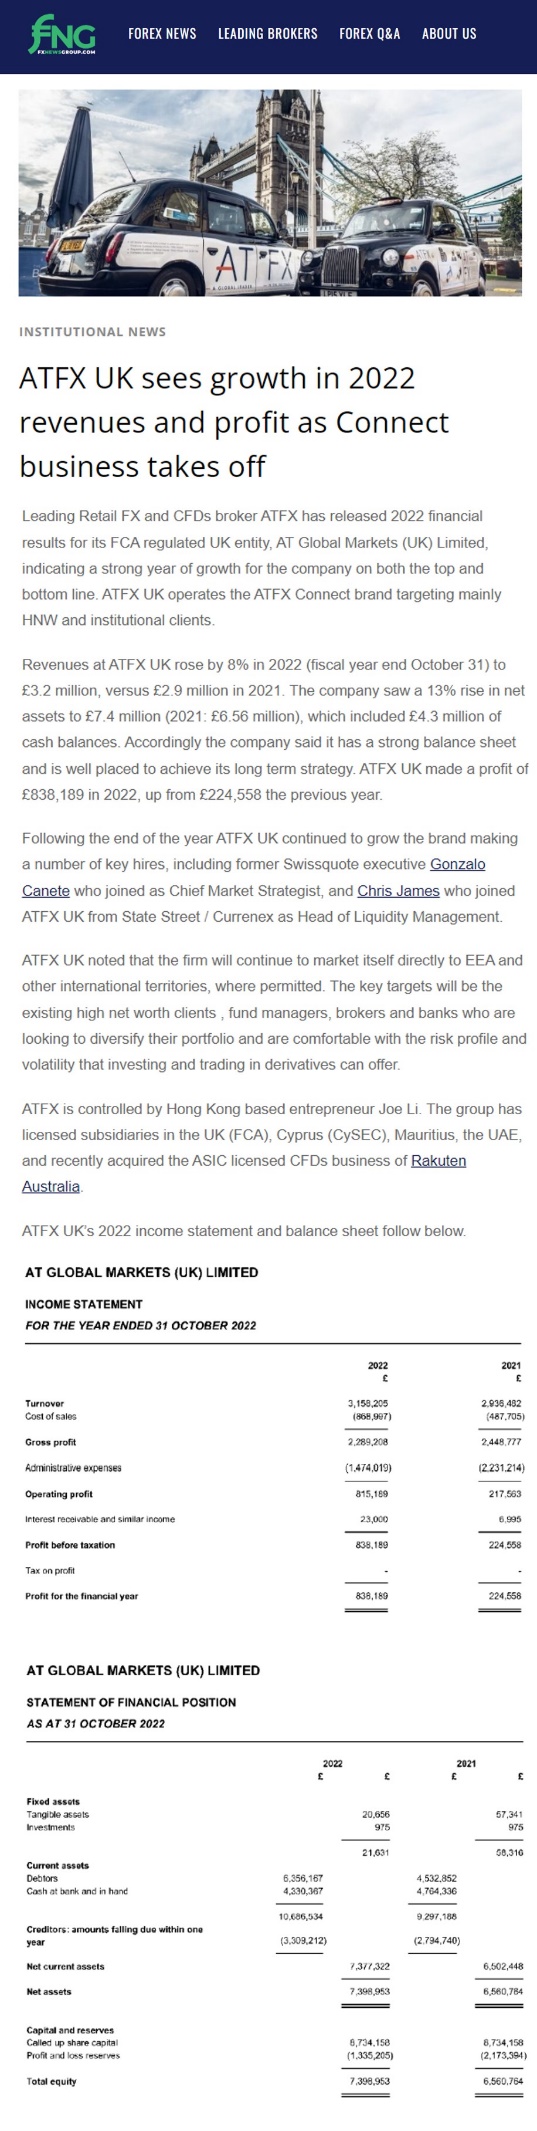 Excellent performance,ATFXInstitutional business attracts industry media attention708 / author:atfx2019 / PostsID:1724704